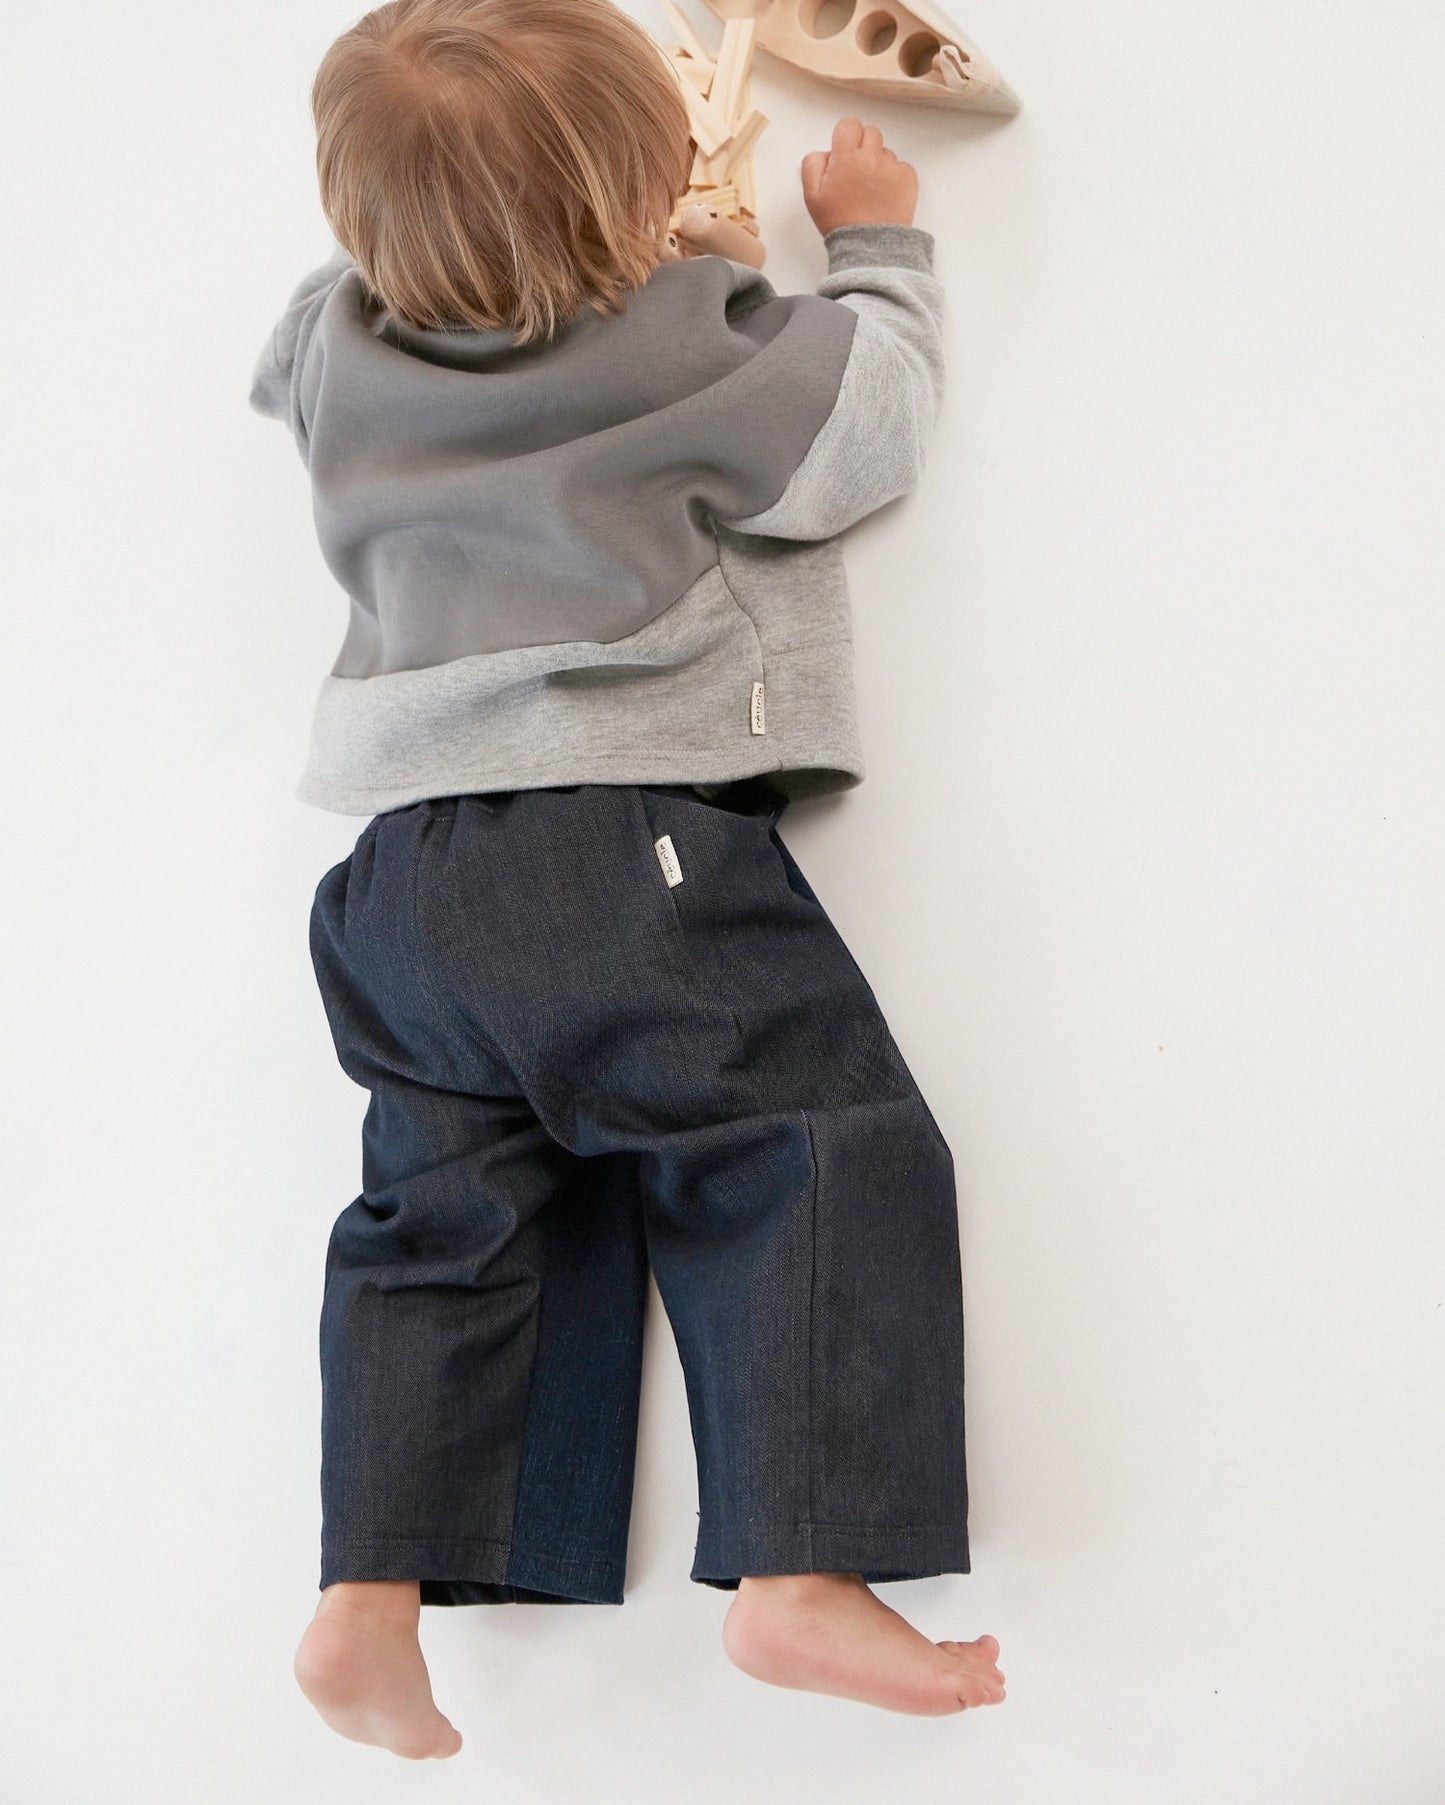 Pantalon pour enfant, jean, jambes larges et droites. Taille élastiquée, ceinture réglable avec cordon. Deux poches. Upcyclé, minimal et oversized. Made in France. Kid pants, denim, wide, straight legs. Elasticated waistband, adjustable waistband with drawstring. Two pockets. Upcycled, minimal and oversized. Made in France.